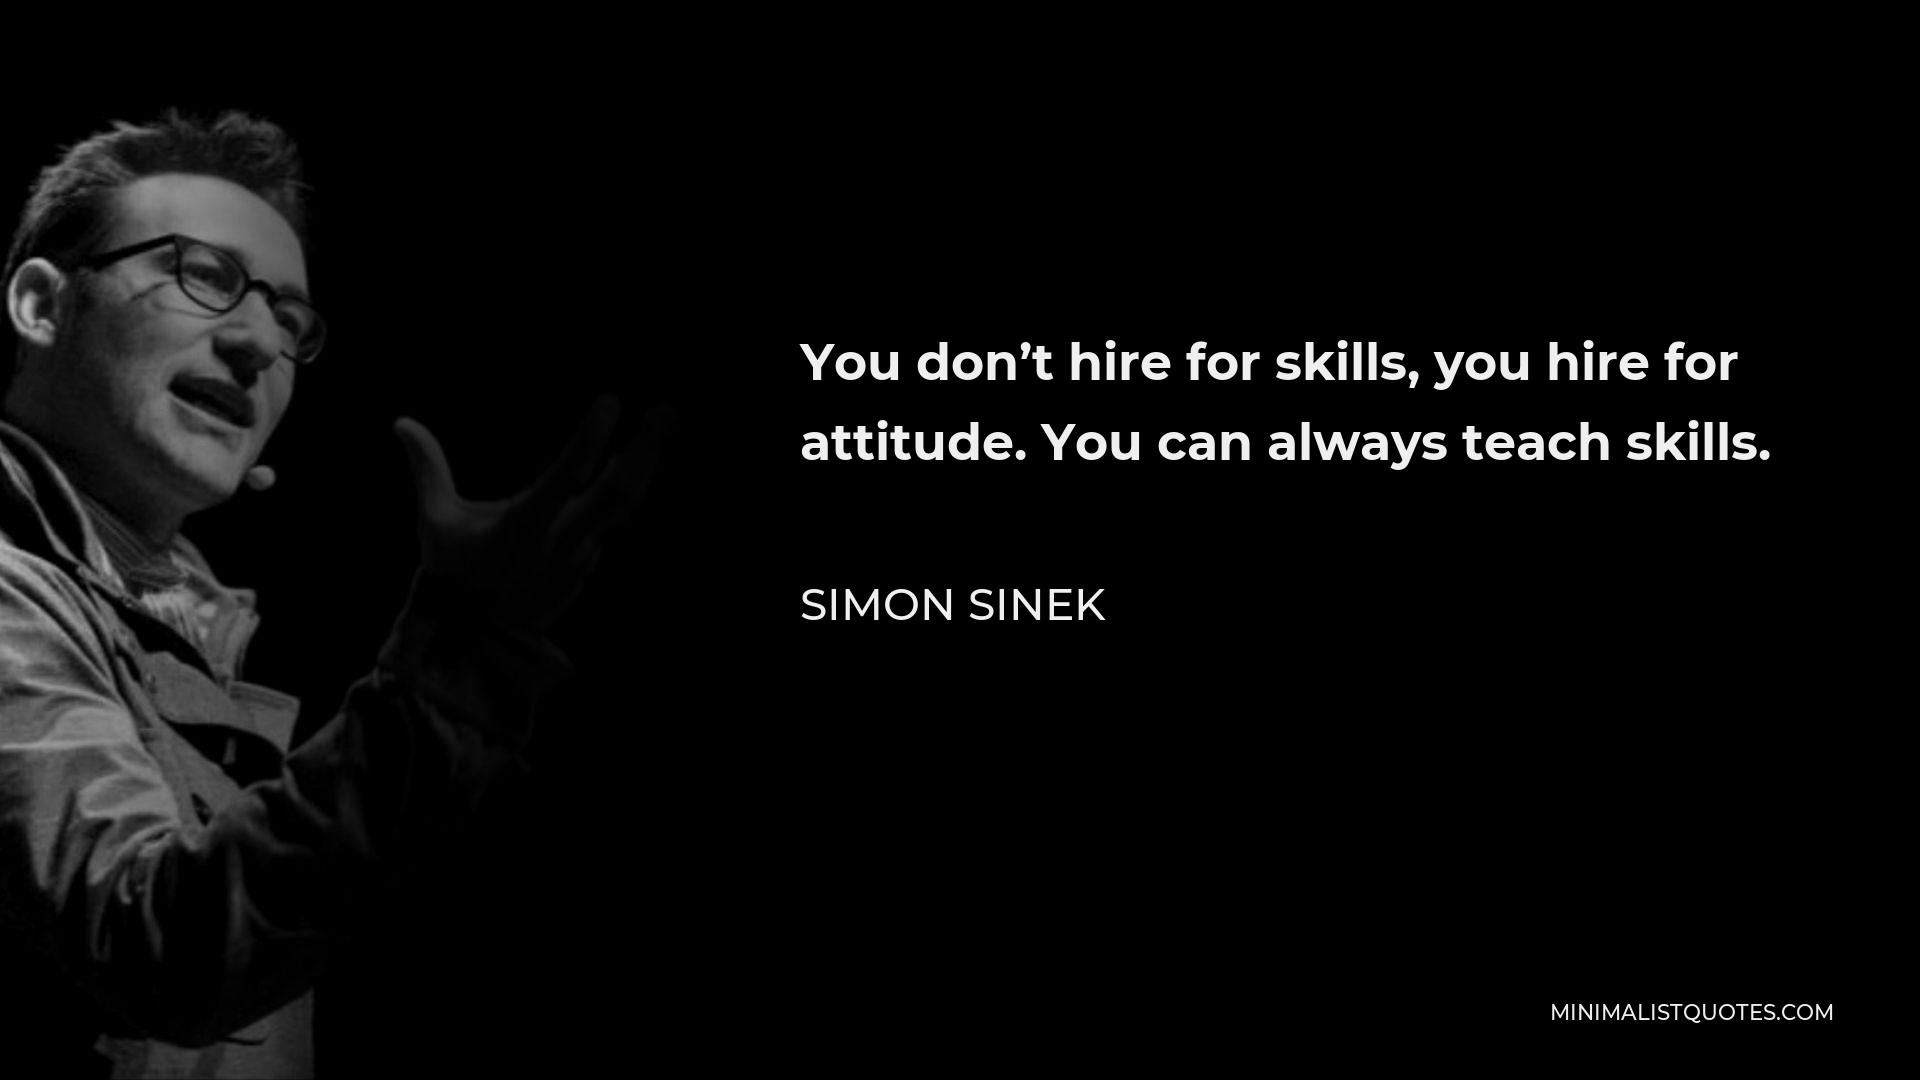 Simon Sinek Quote - You don’t hire for skills, you hire for attitude. You can always teach skills.